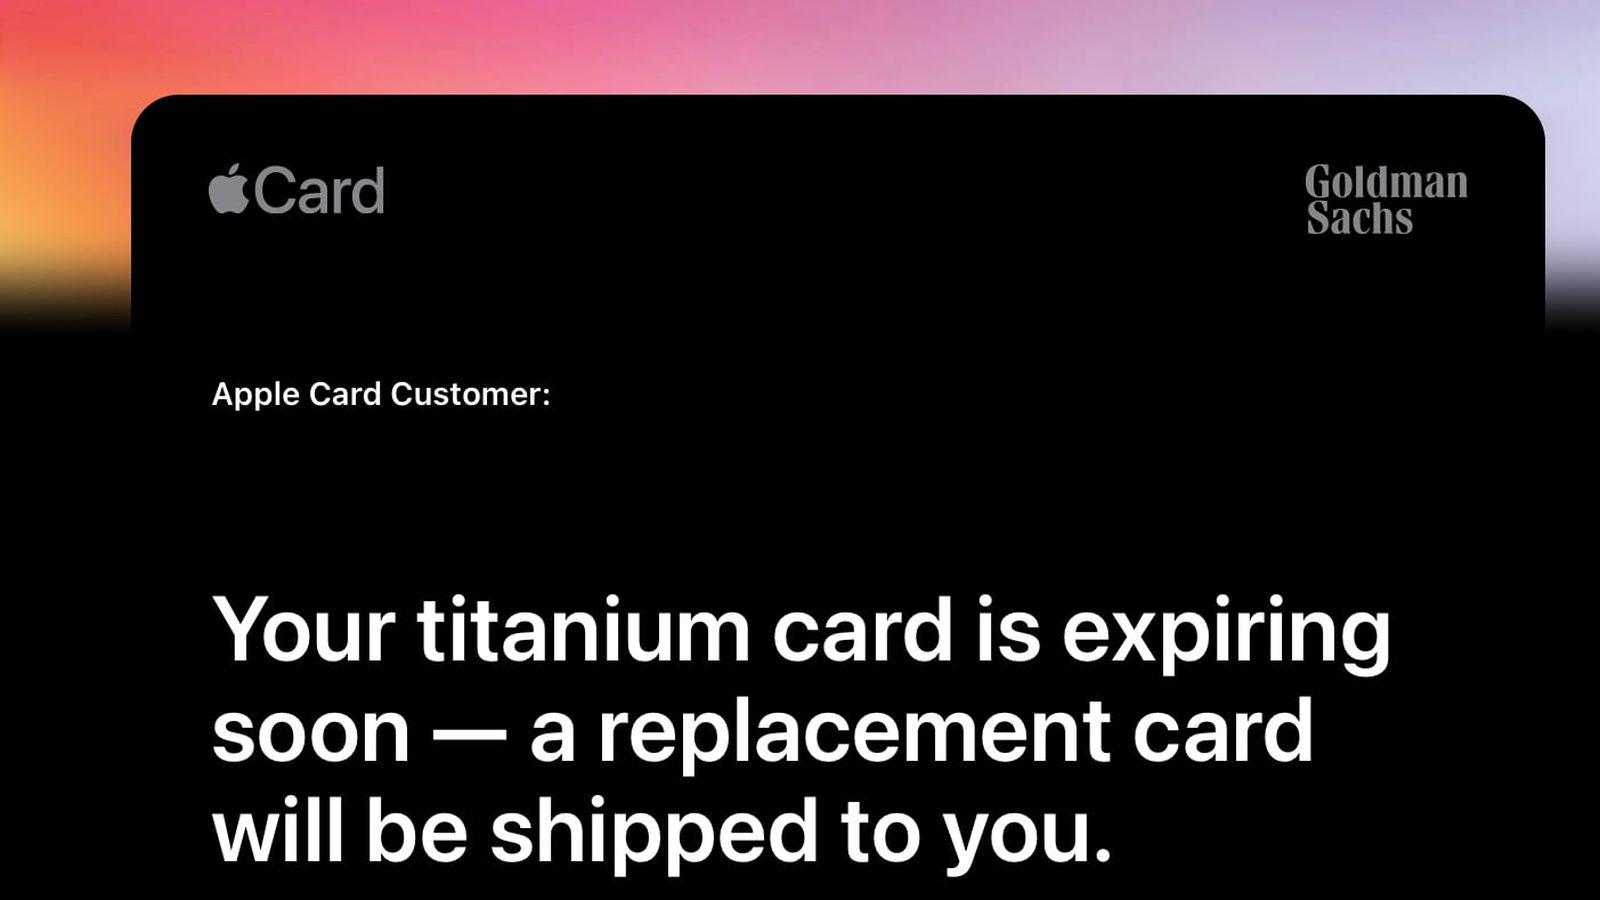 Apple today began informing early Apple Card customers that their physical titanium cards are set to expire this summer, with replacements to be sent 